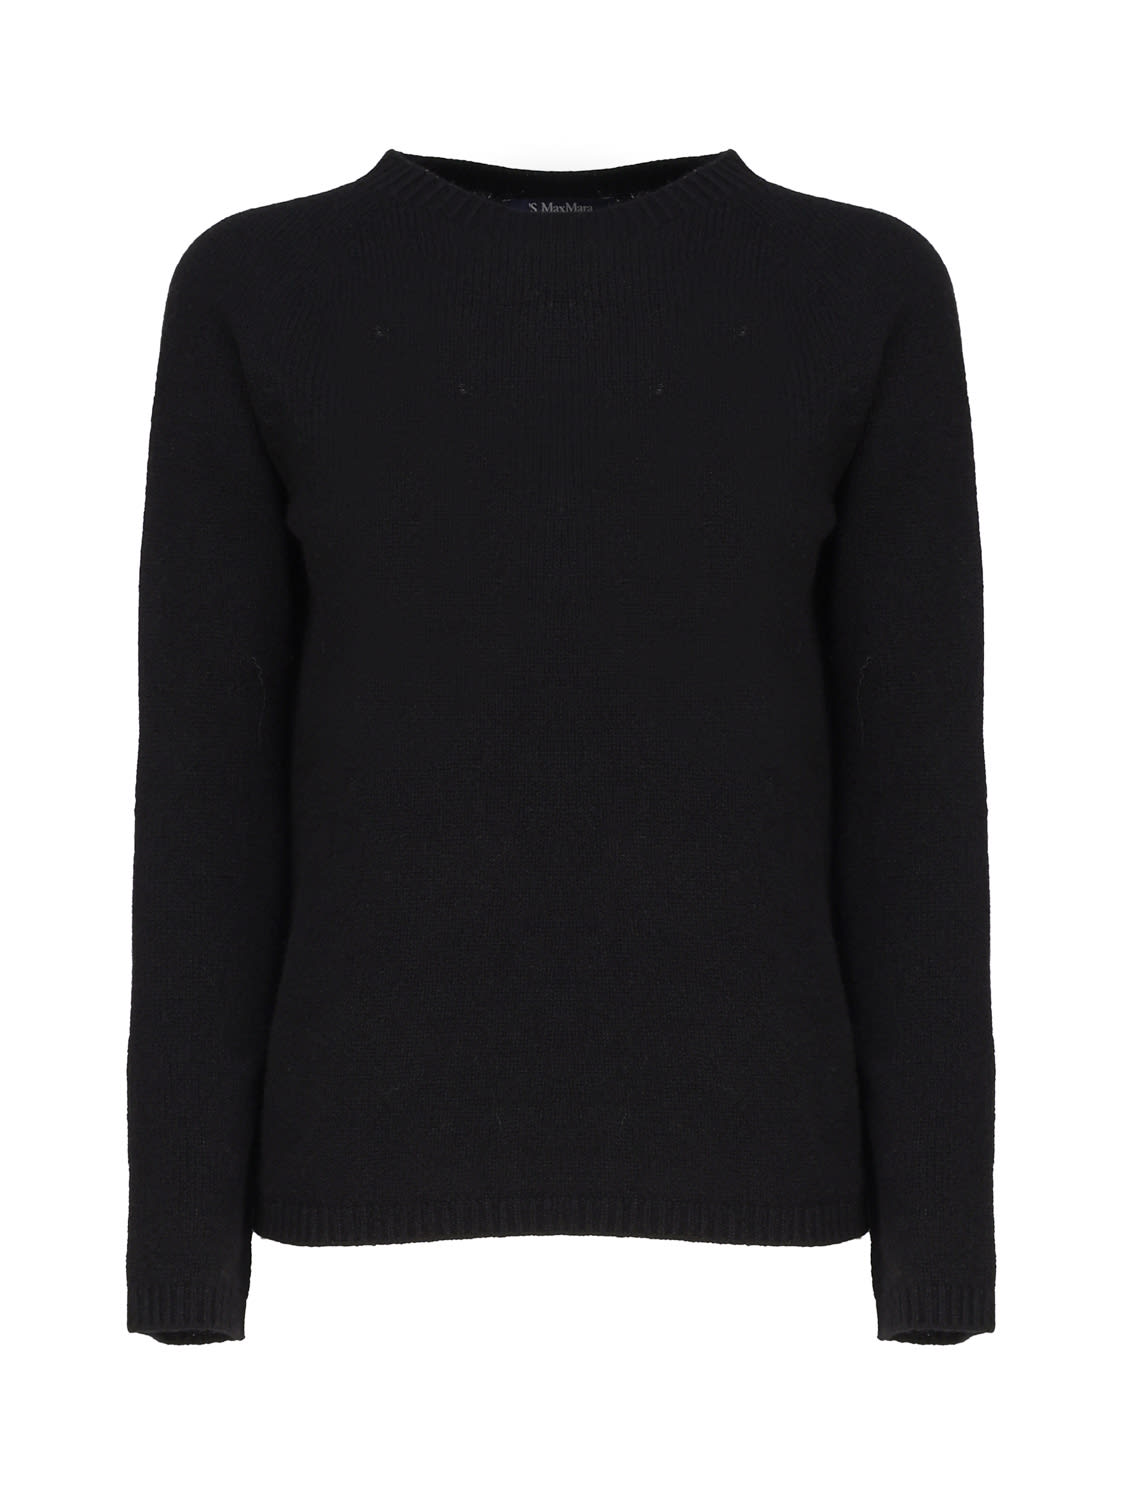 's Max Mara Wool And Cashmere Sweater In Black